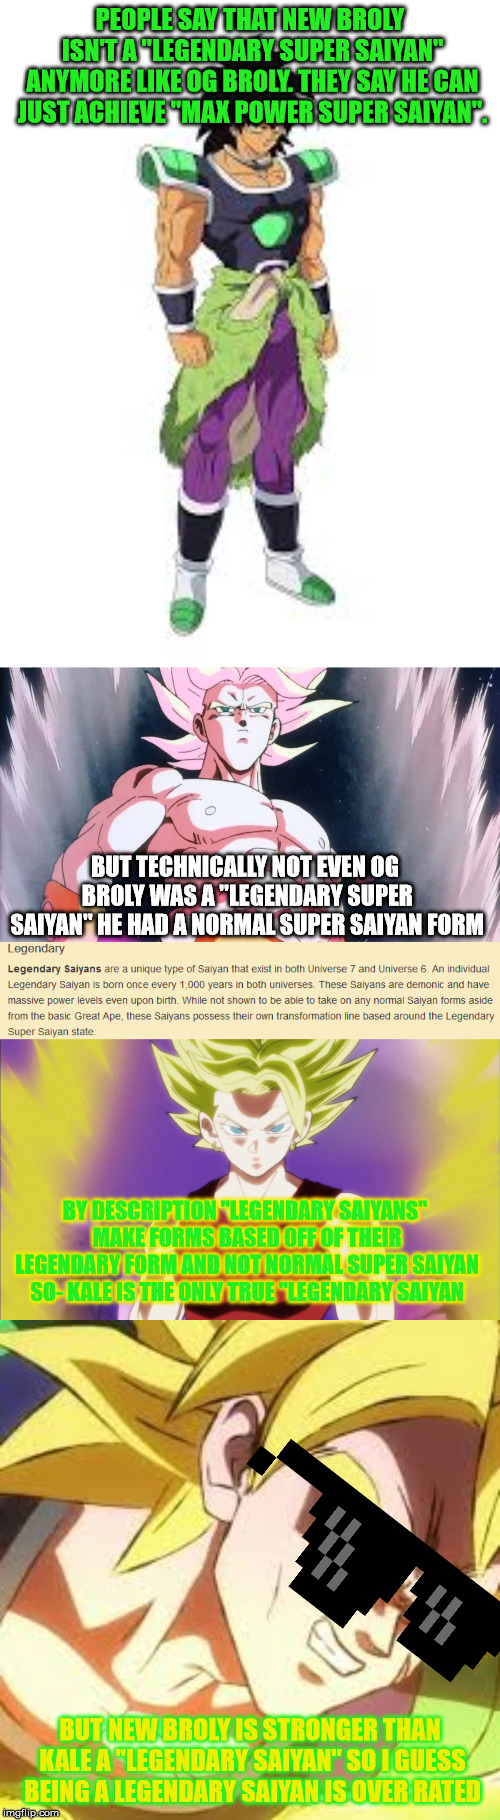 just to make clear that Broly was technically never a Legendary Saiyan | PEOPLE SAY THAT NEW BROLY ISN'T A "LEGENDARY SUPER SAIYAN" ANYMORE LIKE OG BROLY. THEY SAY HE CAN JUST ACHIEVE "MAX POWER SUPER SAIYAN". BUT TECHNICALLY NOT EVEN OG BROLY WAS A "LEGENDARY SUPER SAIYAN" HE HAD A NORMAL SUPER SAIYAN FORM; BY DESCRIPTION "LEGENDARY SAIYANS" MAKE FORMS BASED OFF OF THEIR LEGENDARY FORM AND NOT NORMAL SUPER SAIYAN SO- KALE IS THE ONLY TRUE "LEGENDARY SAIYAN; BUT NEW BROLY IS STRONGER THAN KALE A "LEGENDARY SAIYAN" SO I GUESS BEING A LEGENDARY SAIYAN IS OVER RATED | image tagged in dragon ball super,dragon ball z,dragonball,truth,memes,funny | made w/ Imgflip meme maker